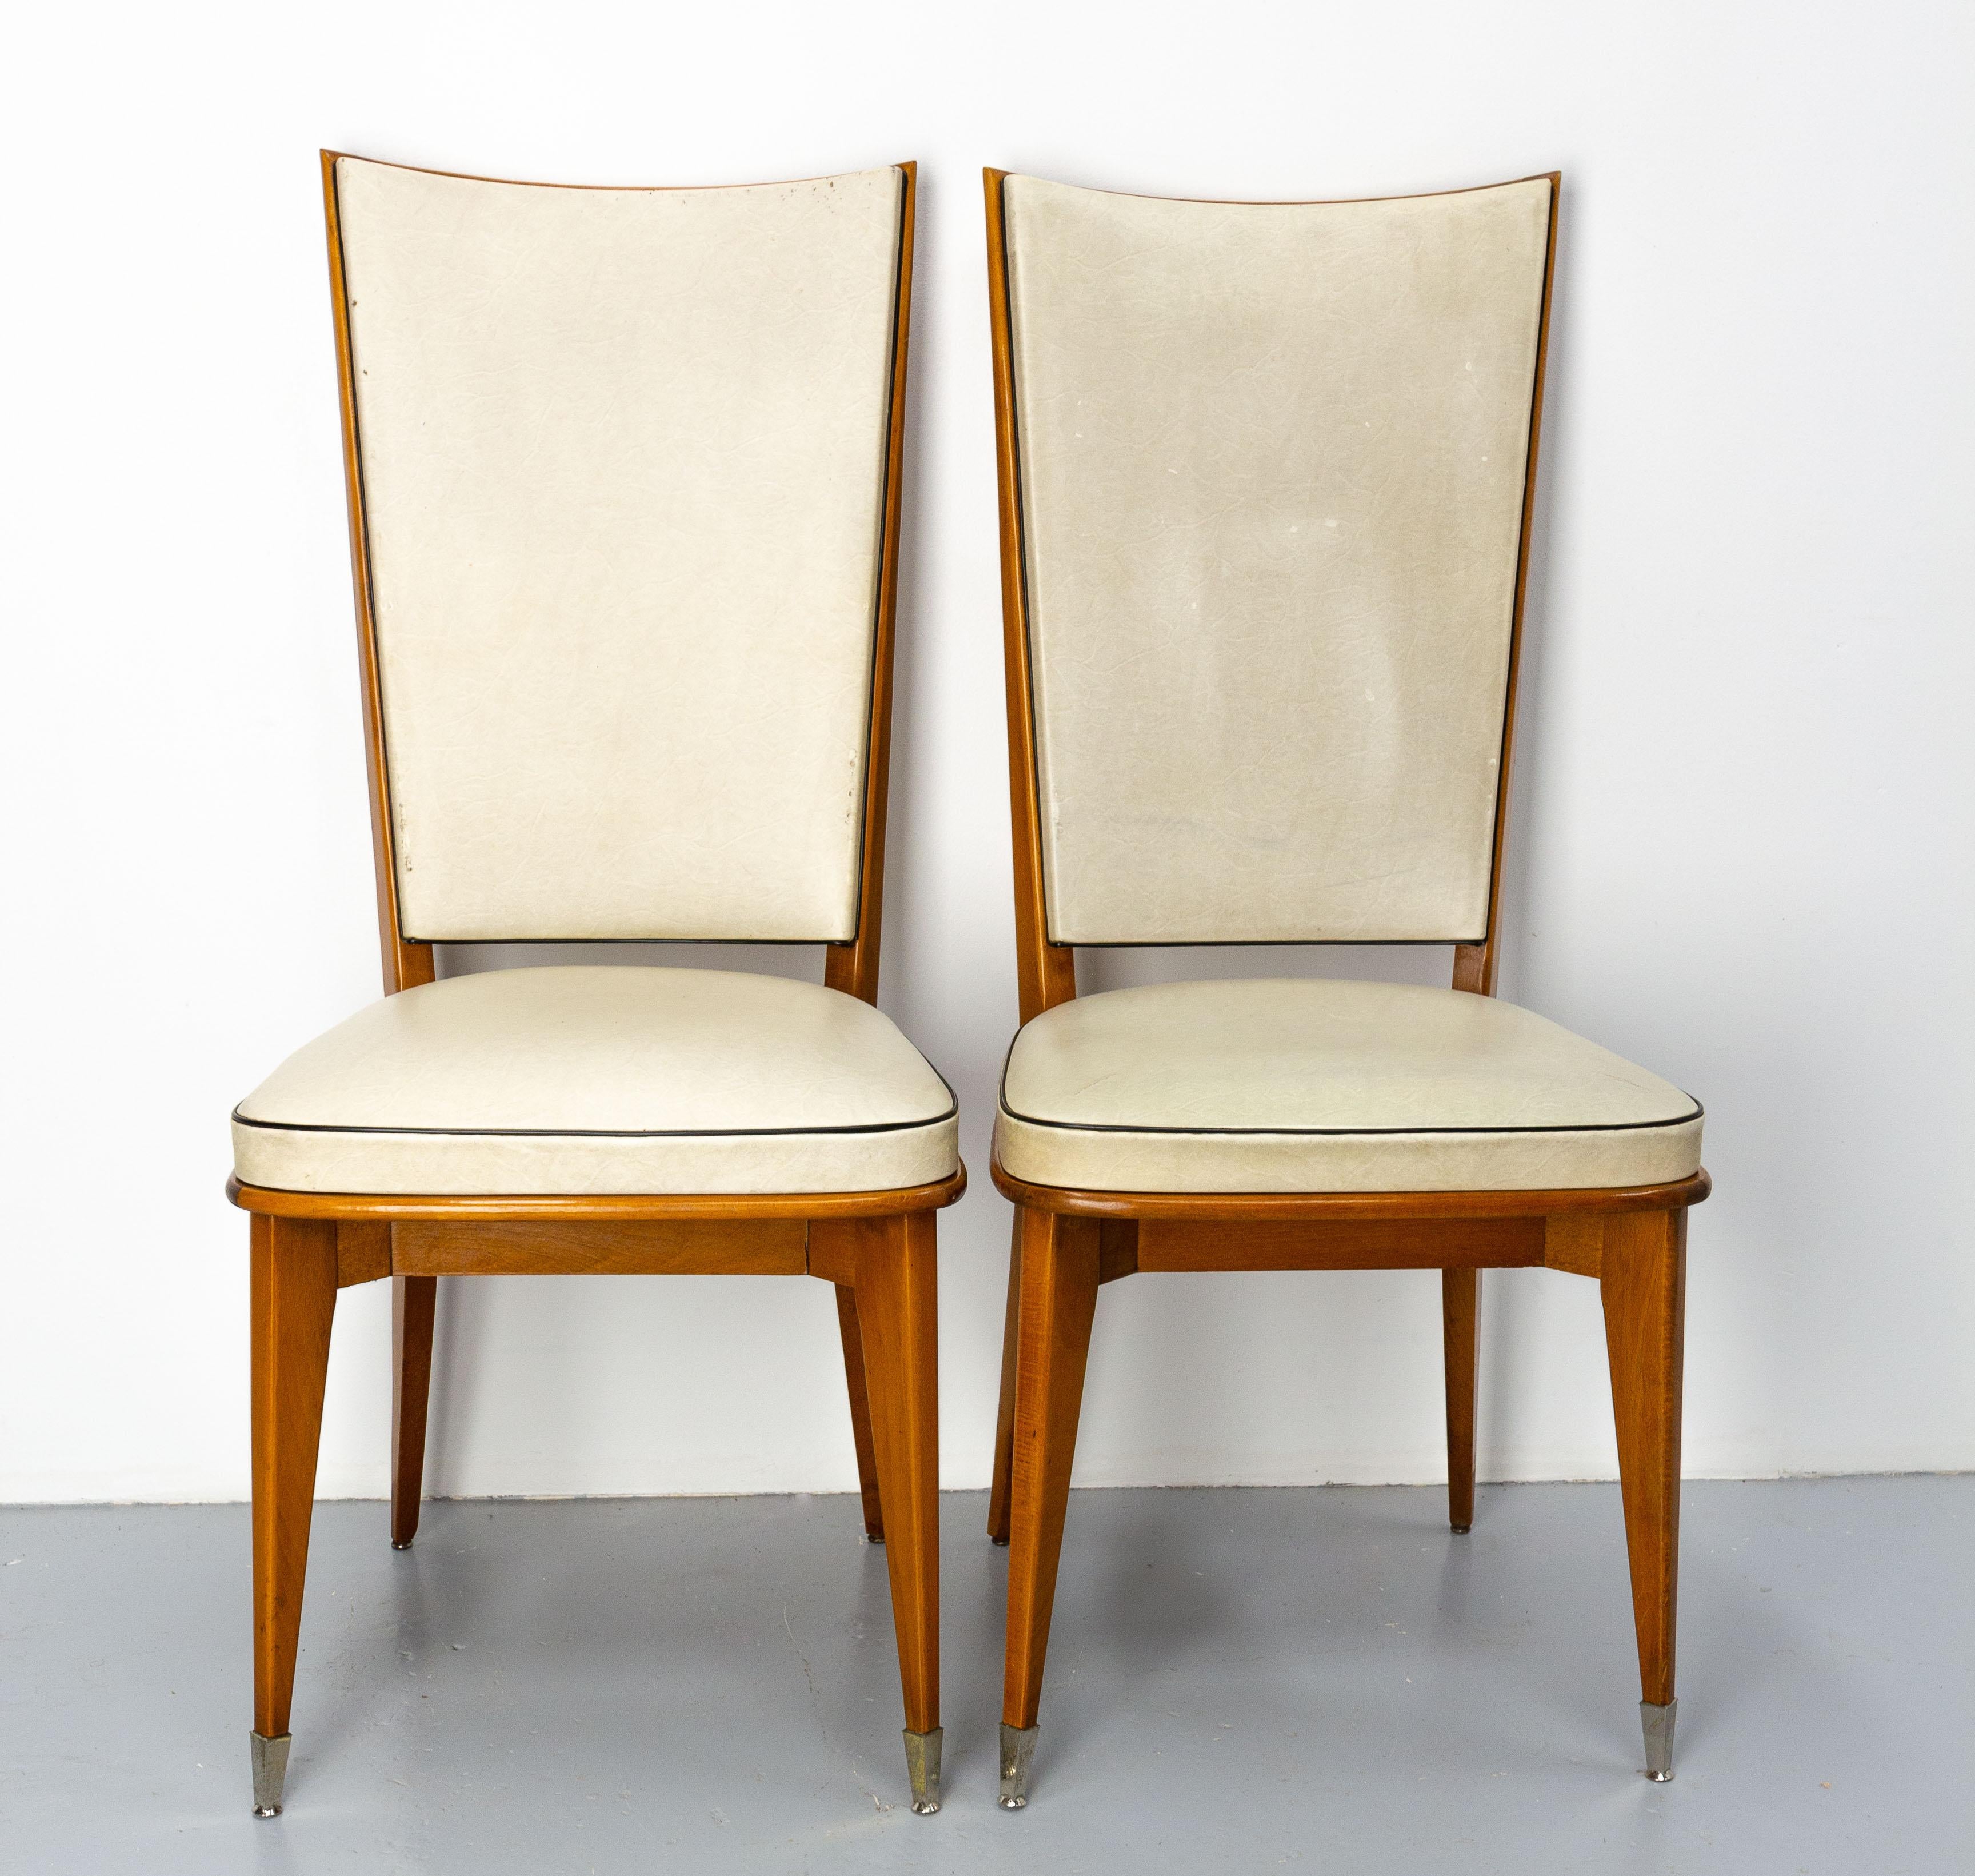 Six Dining Chairs Beech and Skai to Recover Midcentury French, circa 1950 In Good Condition For Sale In Labrit, Landes